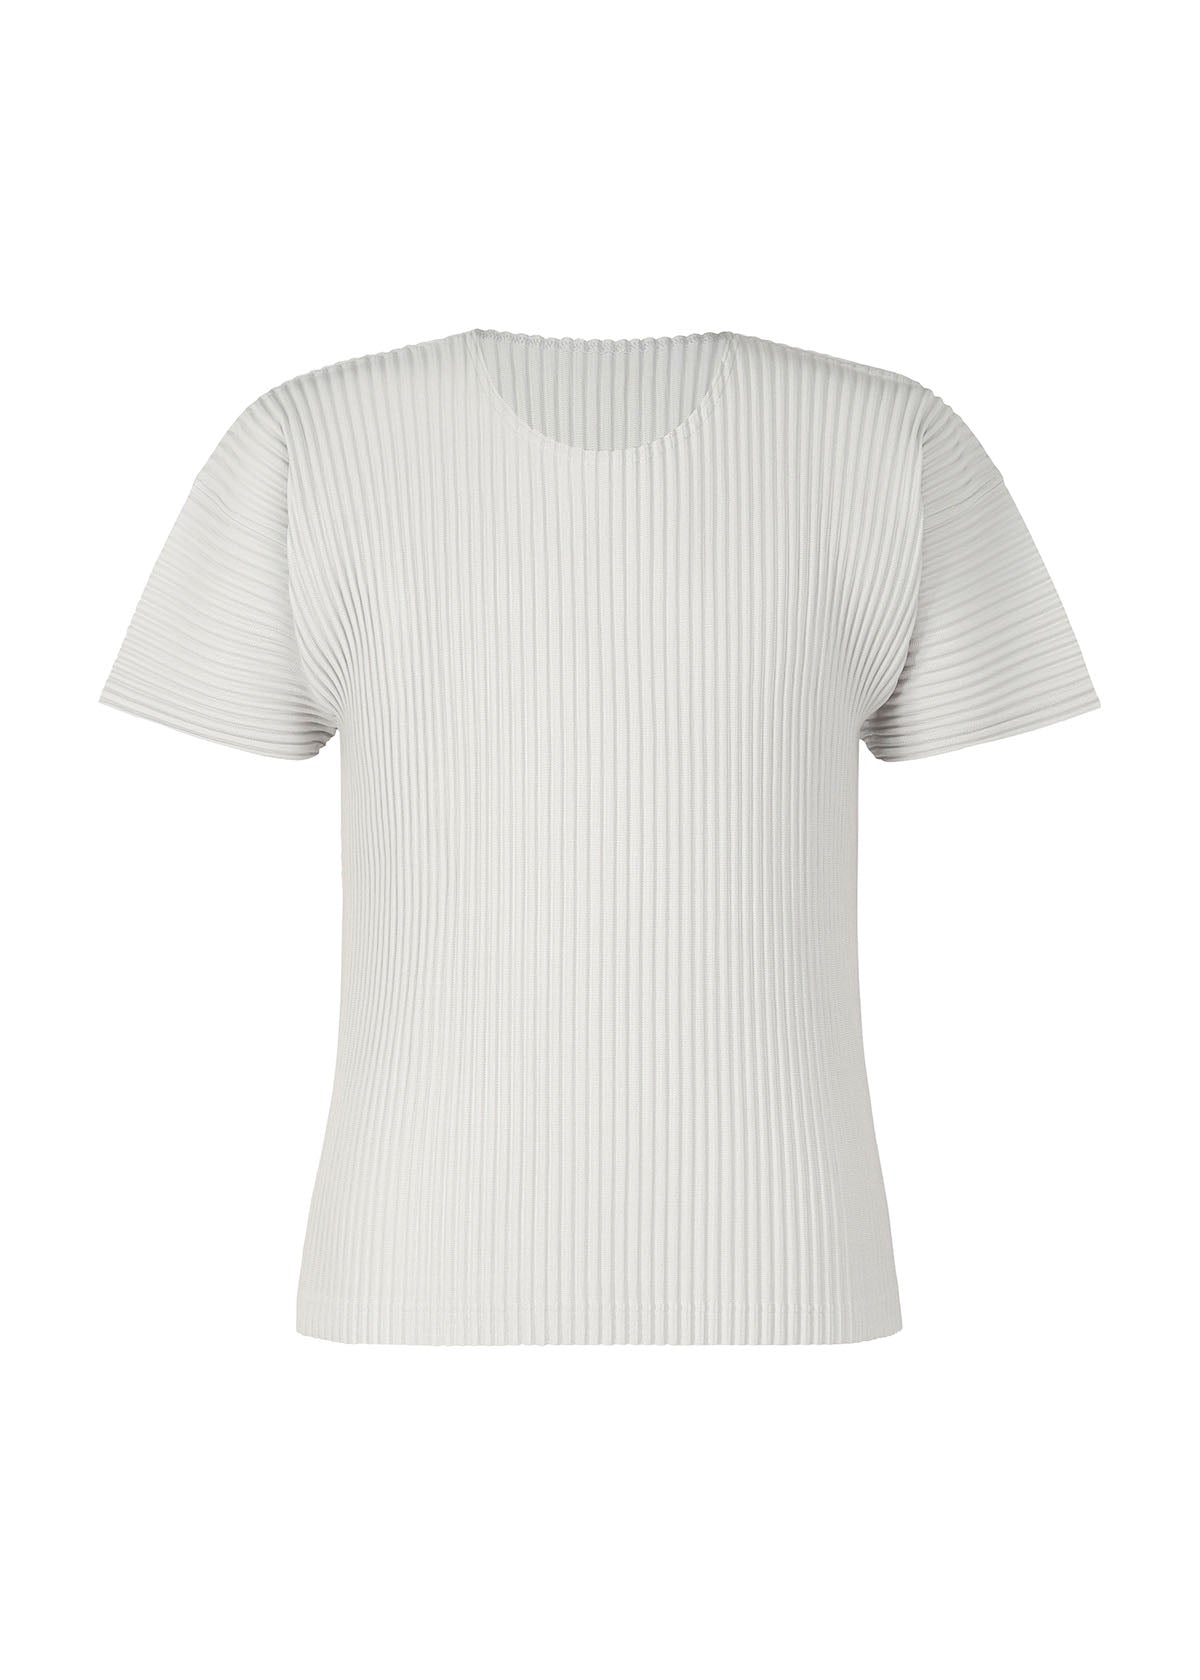 BASICS T-SHIRT | The official ISSEY MIYAKE ONLINE STORE | ISSEY